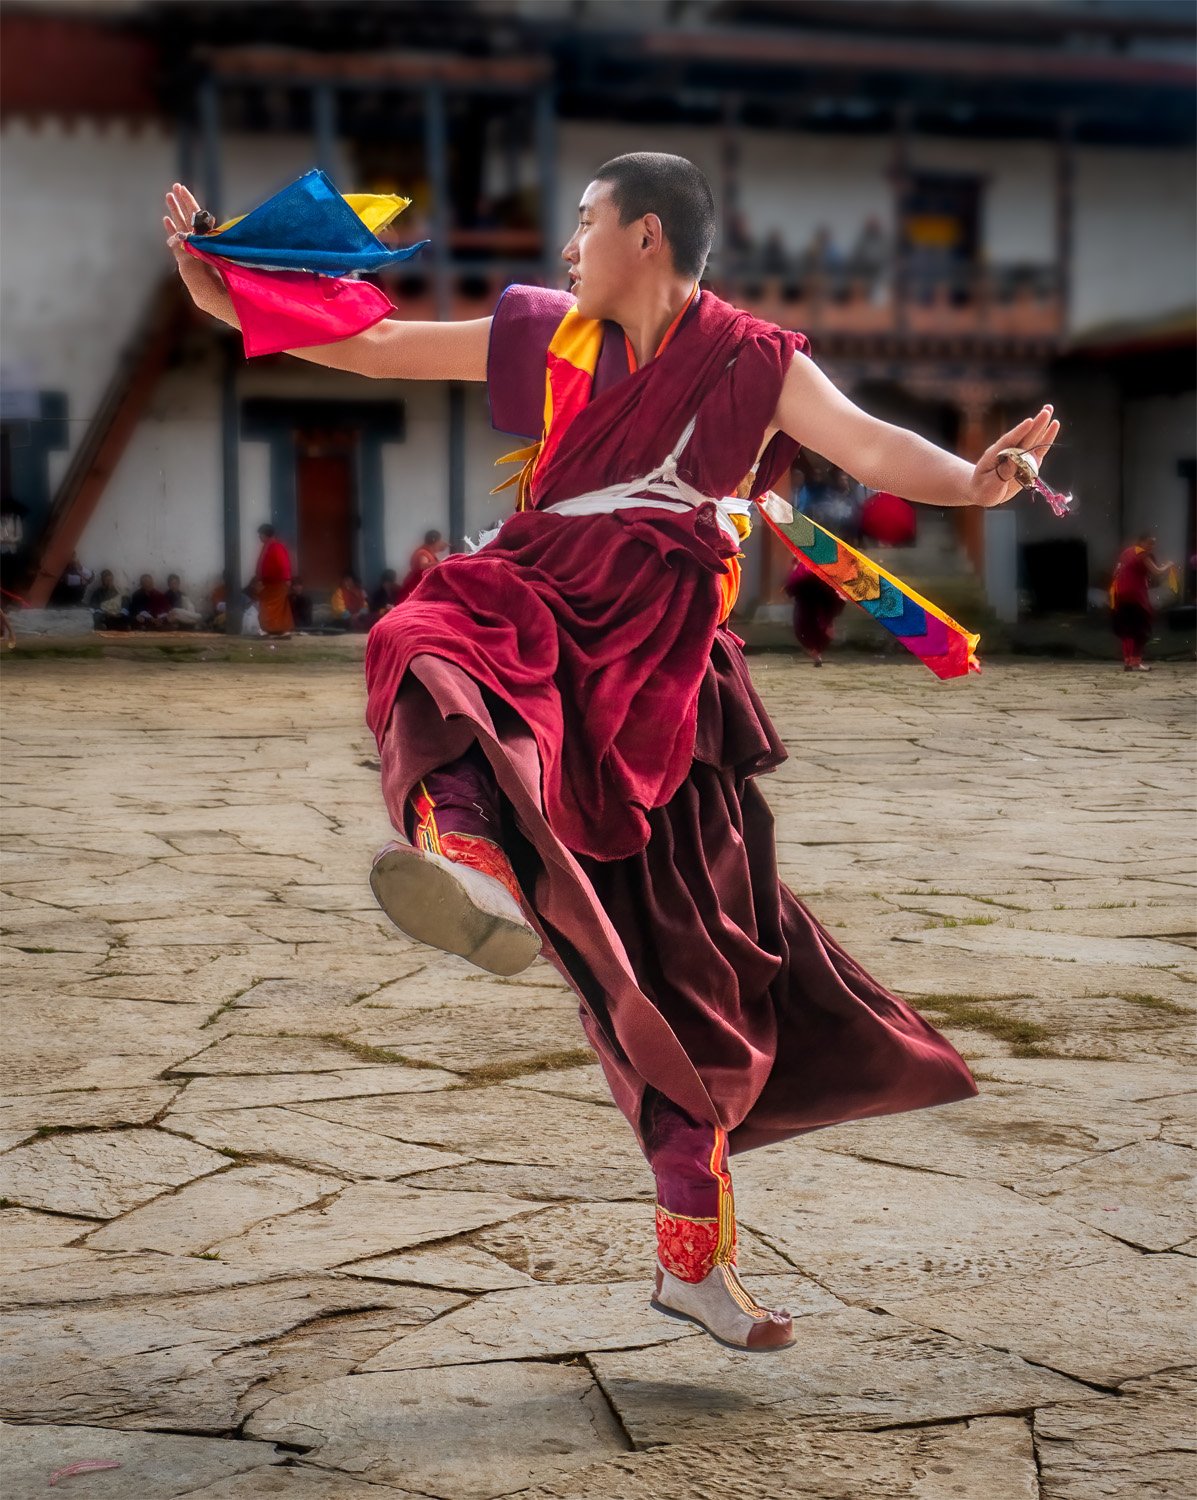 Leaping Buddhist Monk